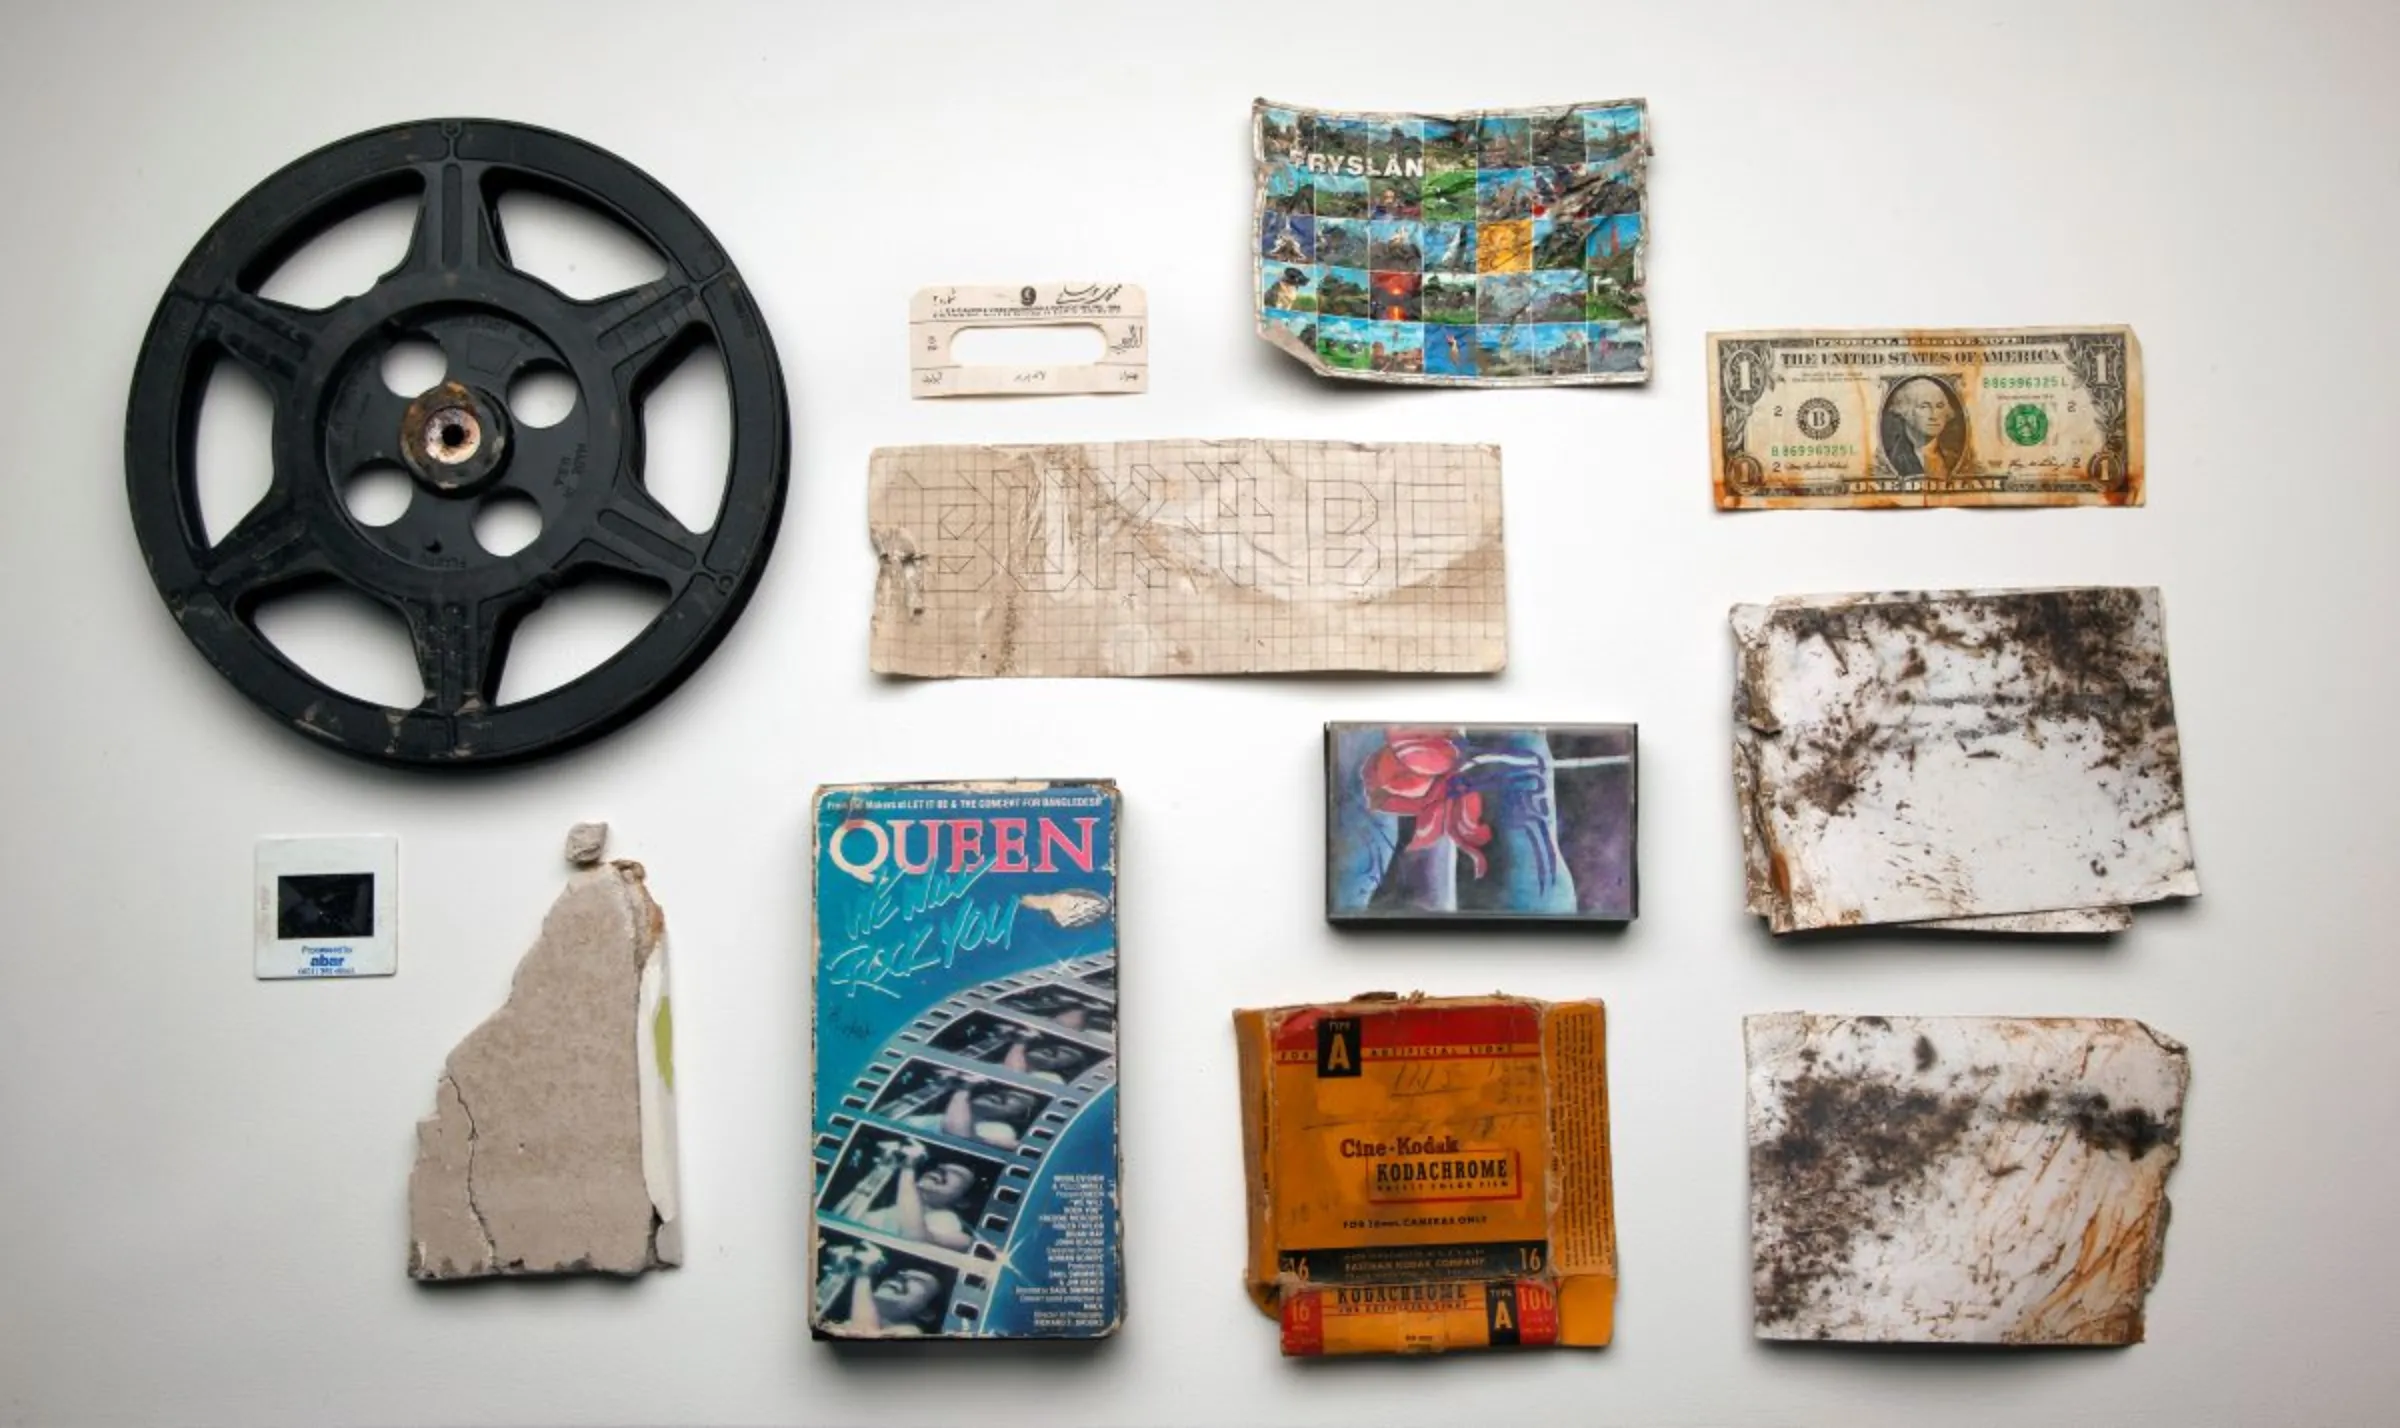 Objects contributed by people in places affected by climate change impacts that are a part of the New Orleans Collection in American artist Amy Balkin’s People's Archive of Sinking and Melting. Mary Lou Saxon Handout via Thomson Reuters Foundation